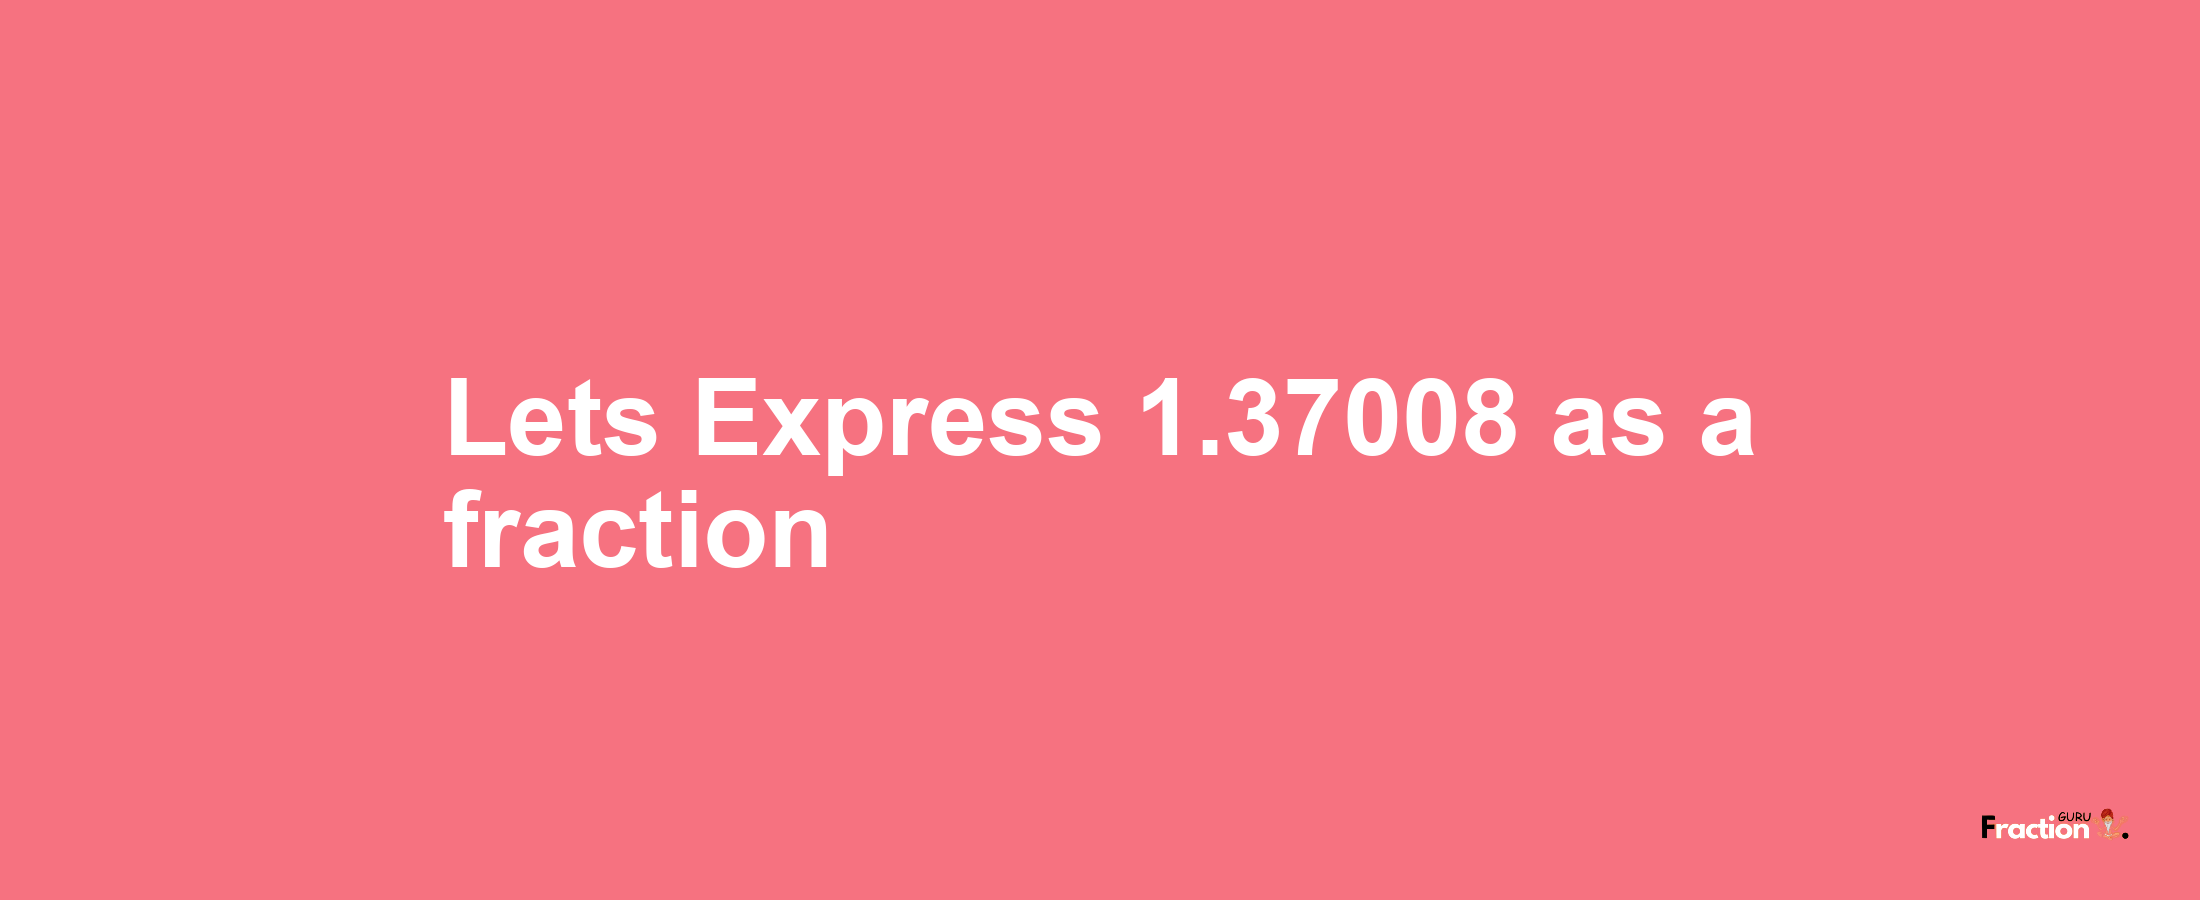 Lets Express 1.37008 as afraction